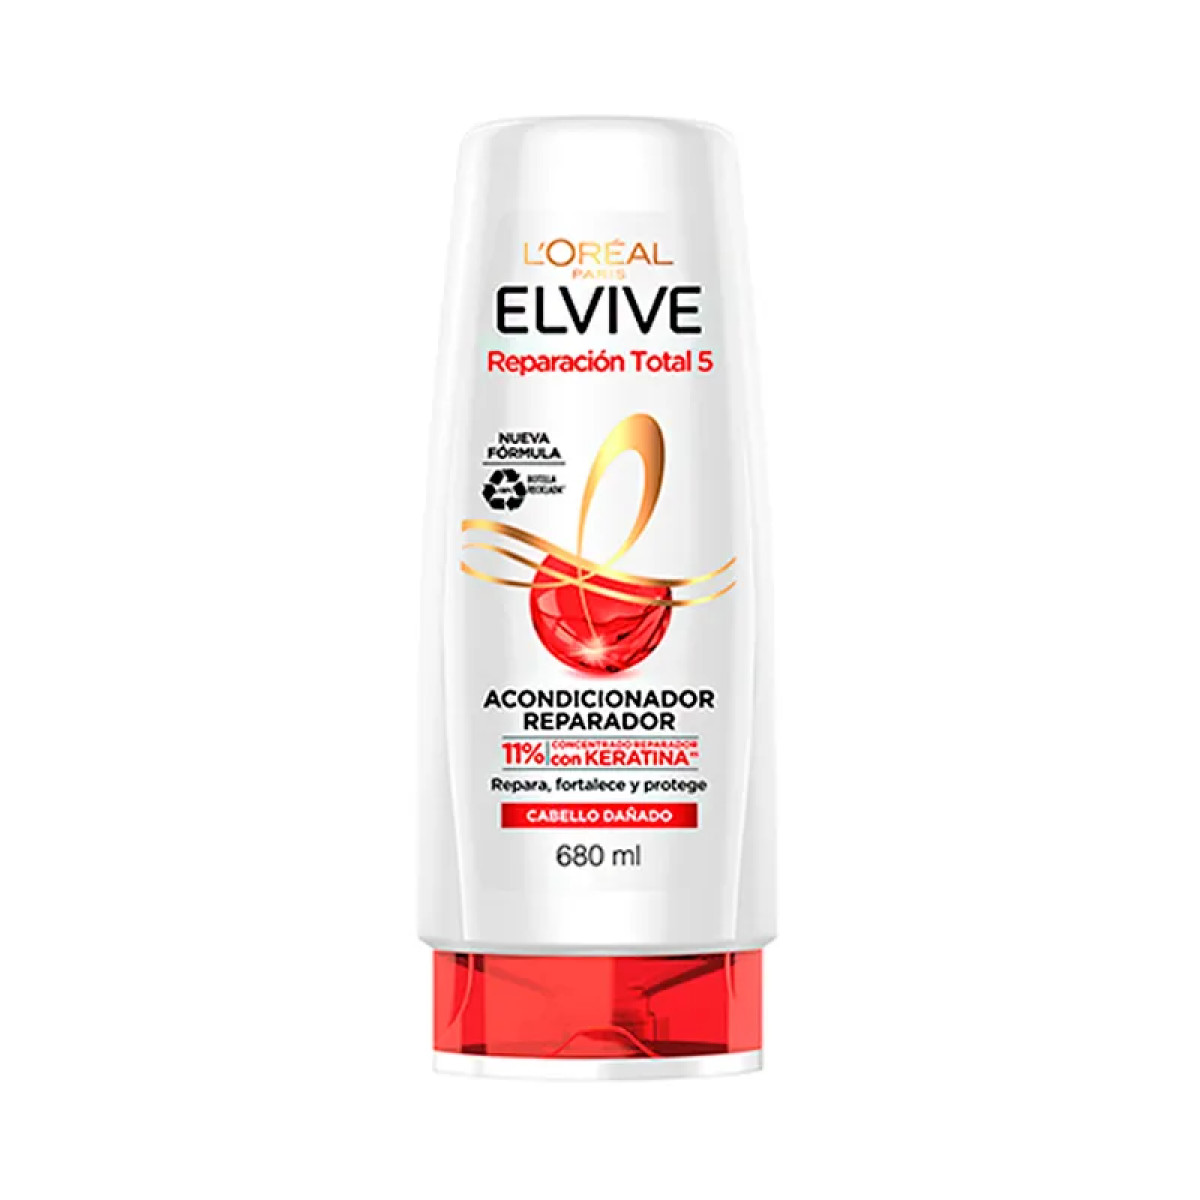 ELVIVE ACOND 680 ML 5 REP TOTAL EXT